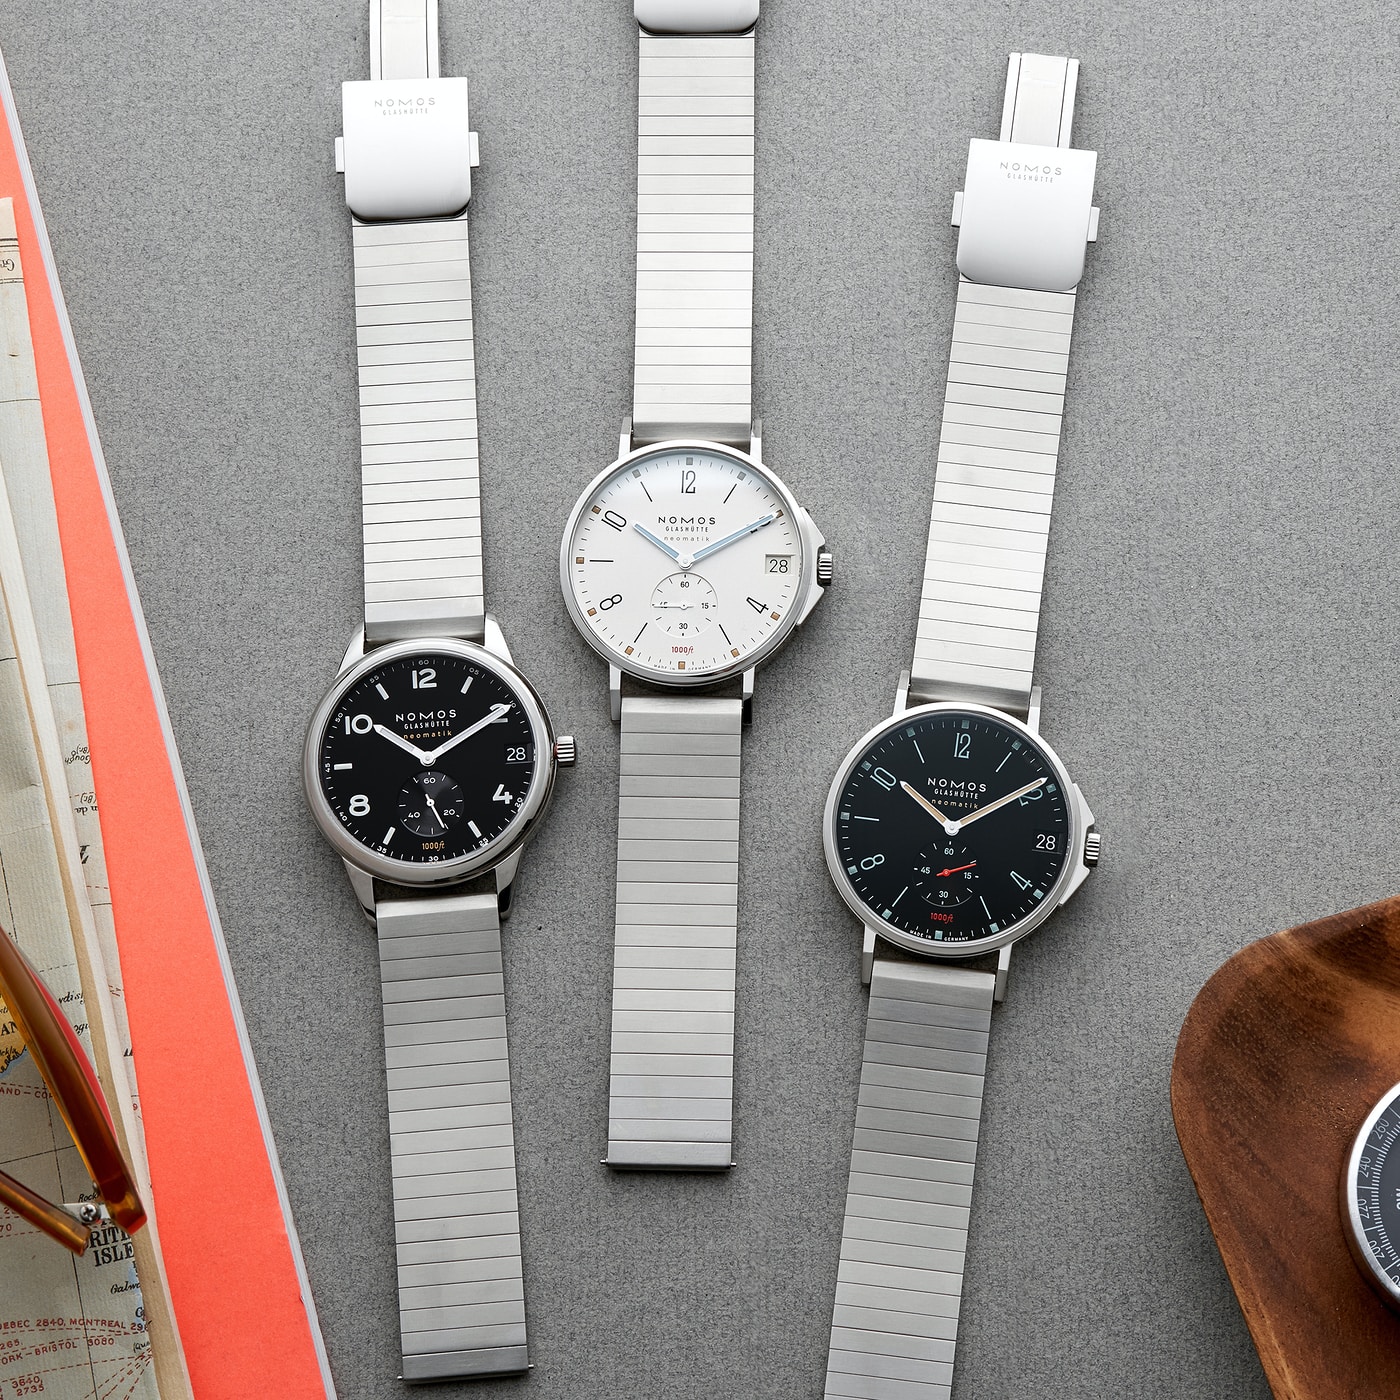 Nomos34to36 group new article hero